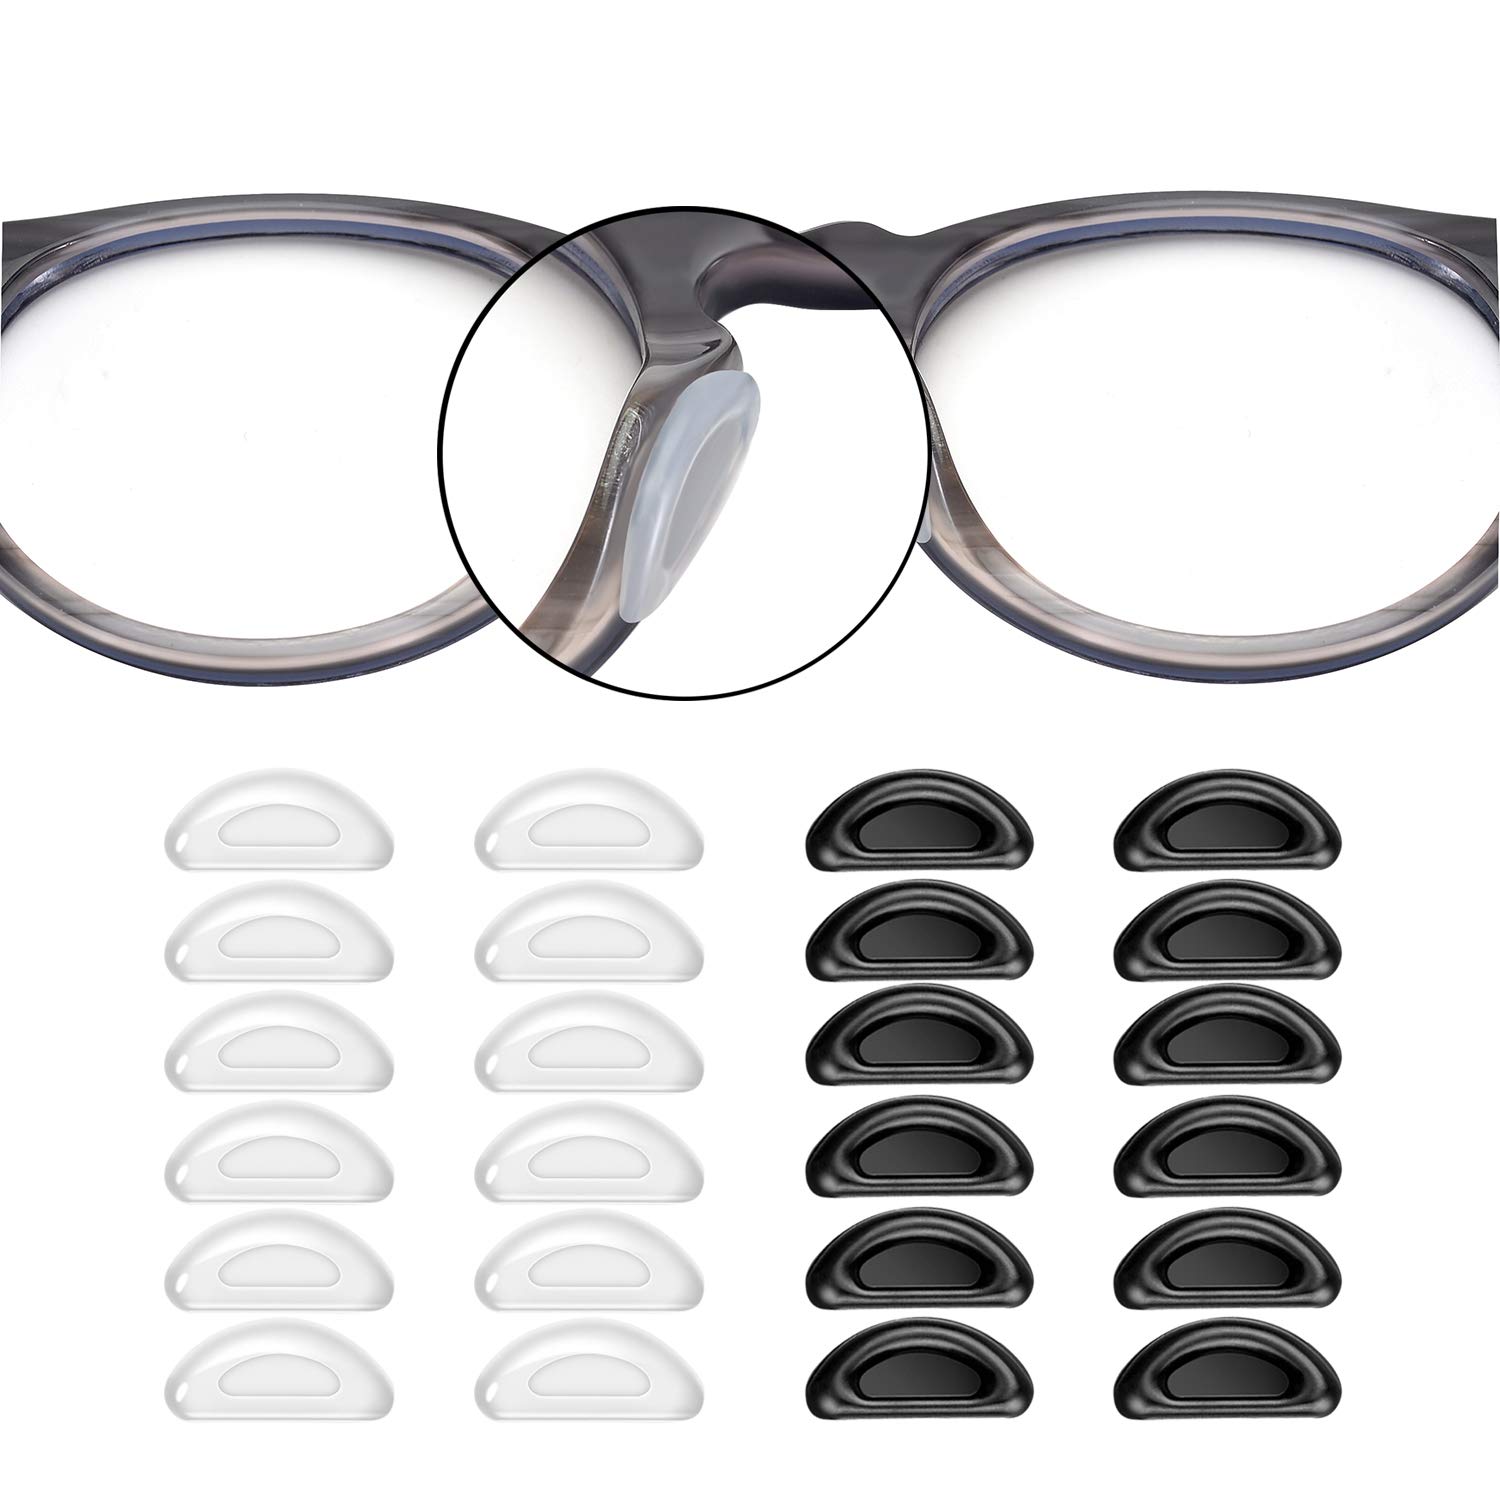 SMARTTOP Adhesive Nose Pad, 12 Pairs Eyeglass Nose Pads Stick On Silicone  Anti-Slip for Glasses